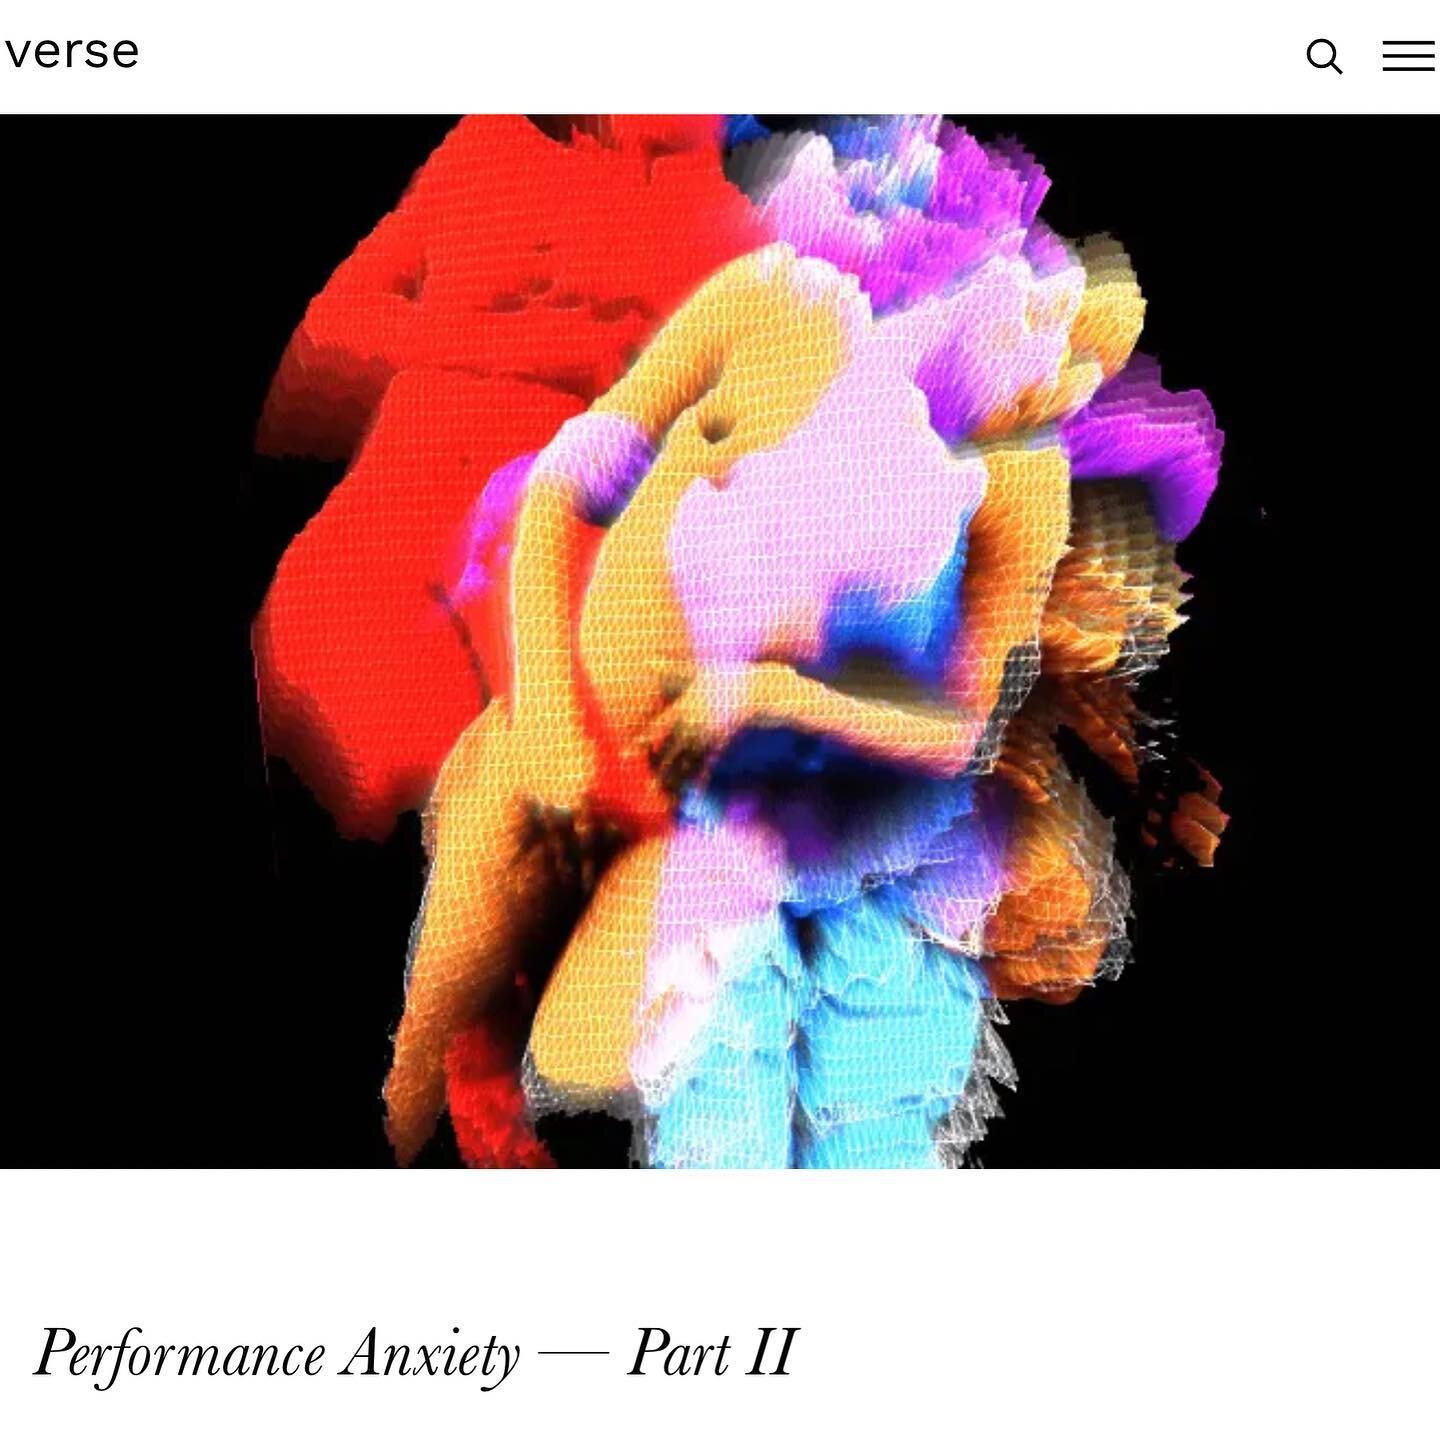 Launching today! My latest curated show with @verse_works - &lsquo;Performance Anxiety Part II&rsquo; features women and non-binary artists creating historically and conceptually important work around the body. 

The exhibition is inspired by the boo